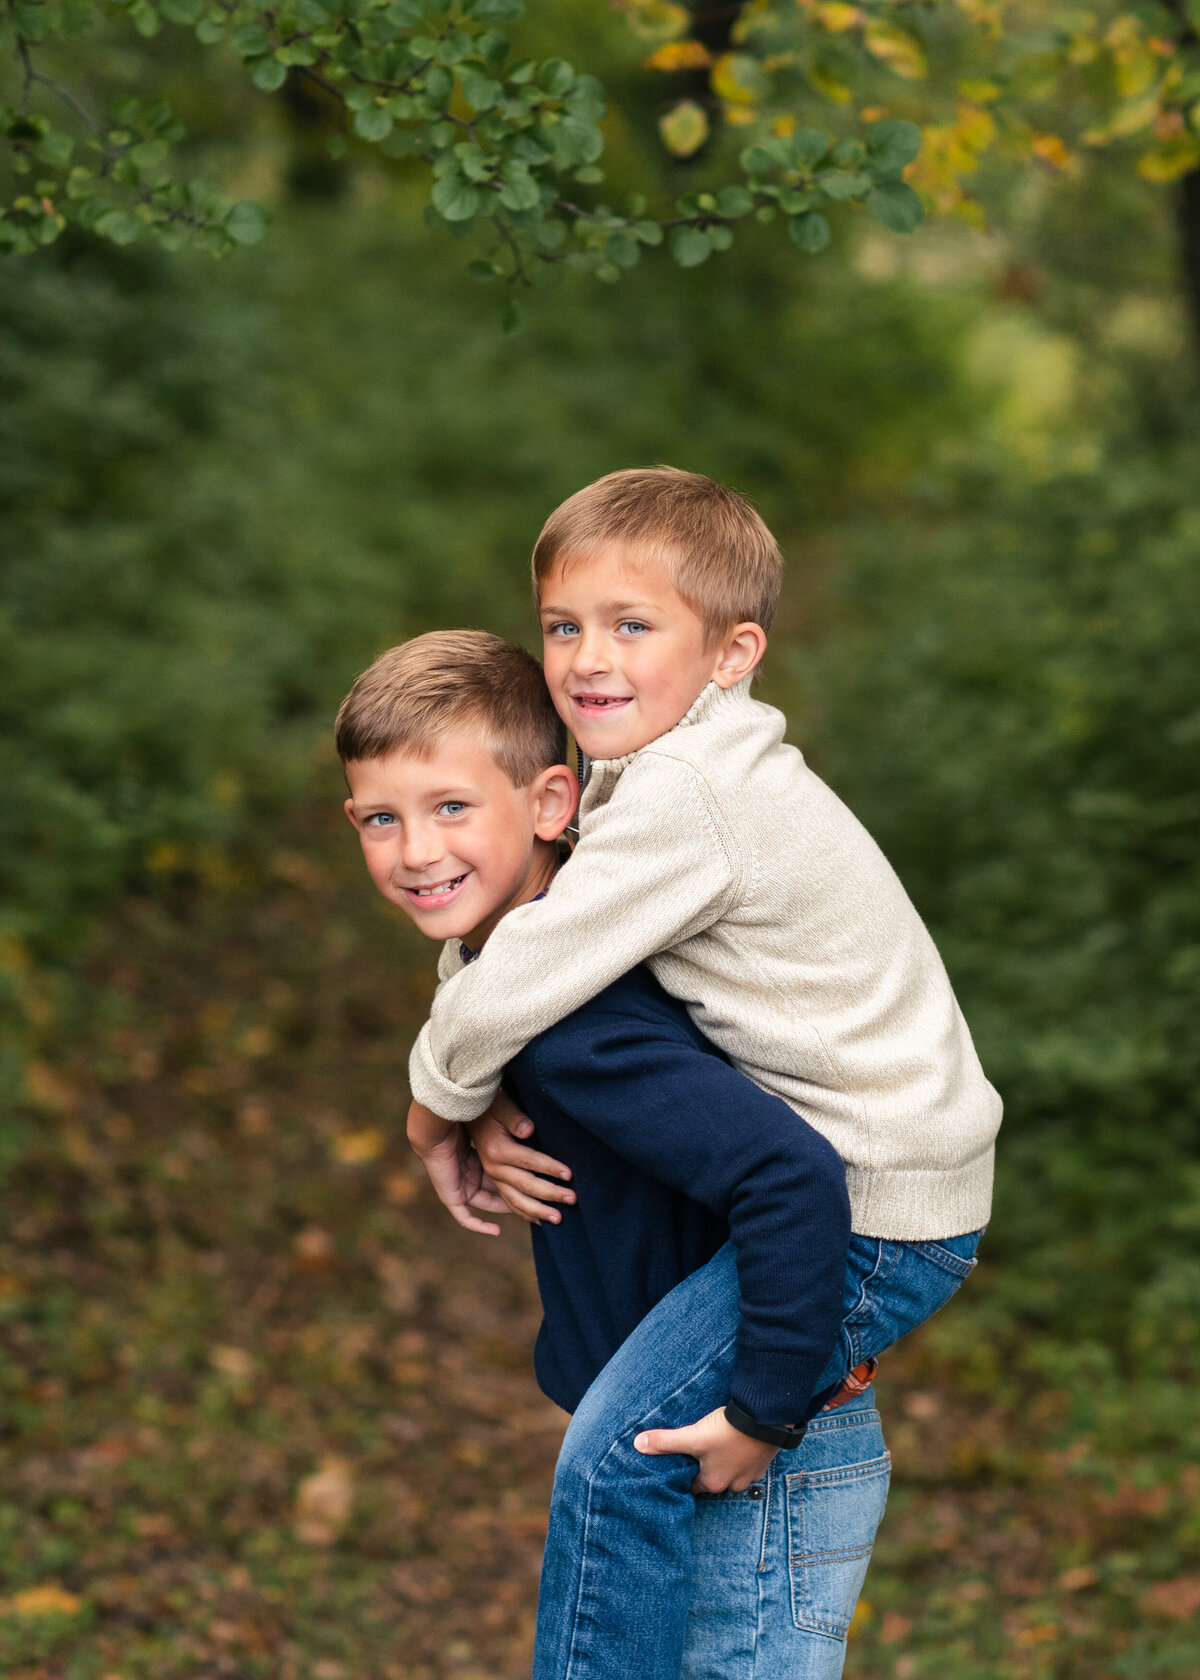 Des-Moines-Iowa-Family-Photographer-Theresa-Schumacher-Photography-Fall-Park-Brothers